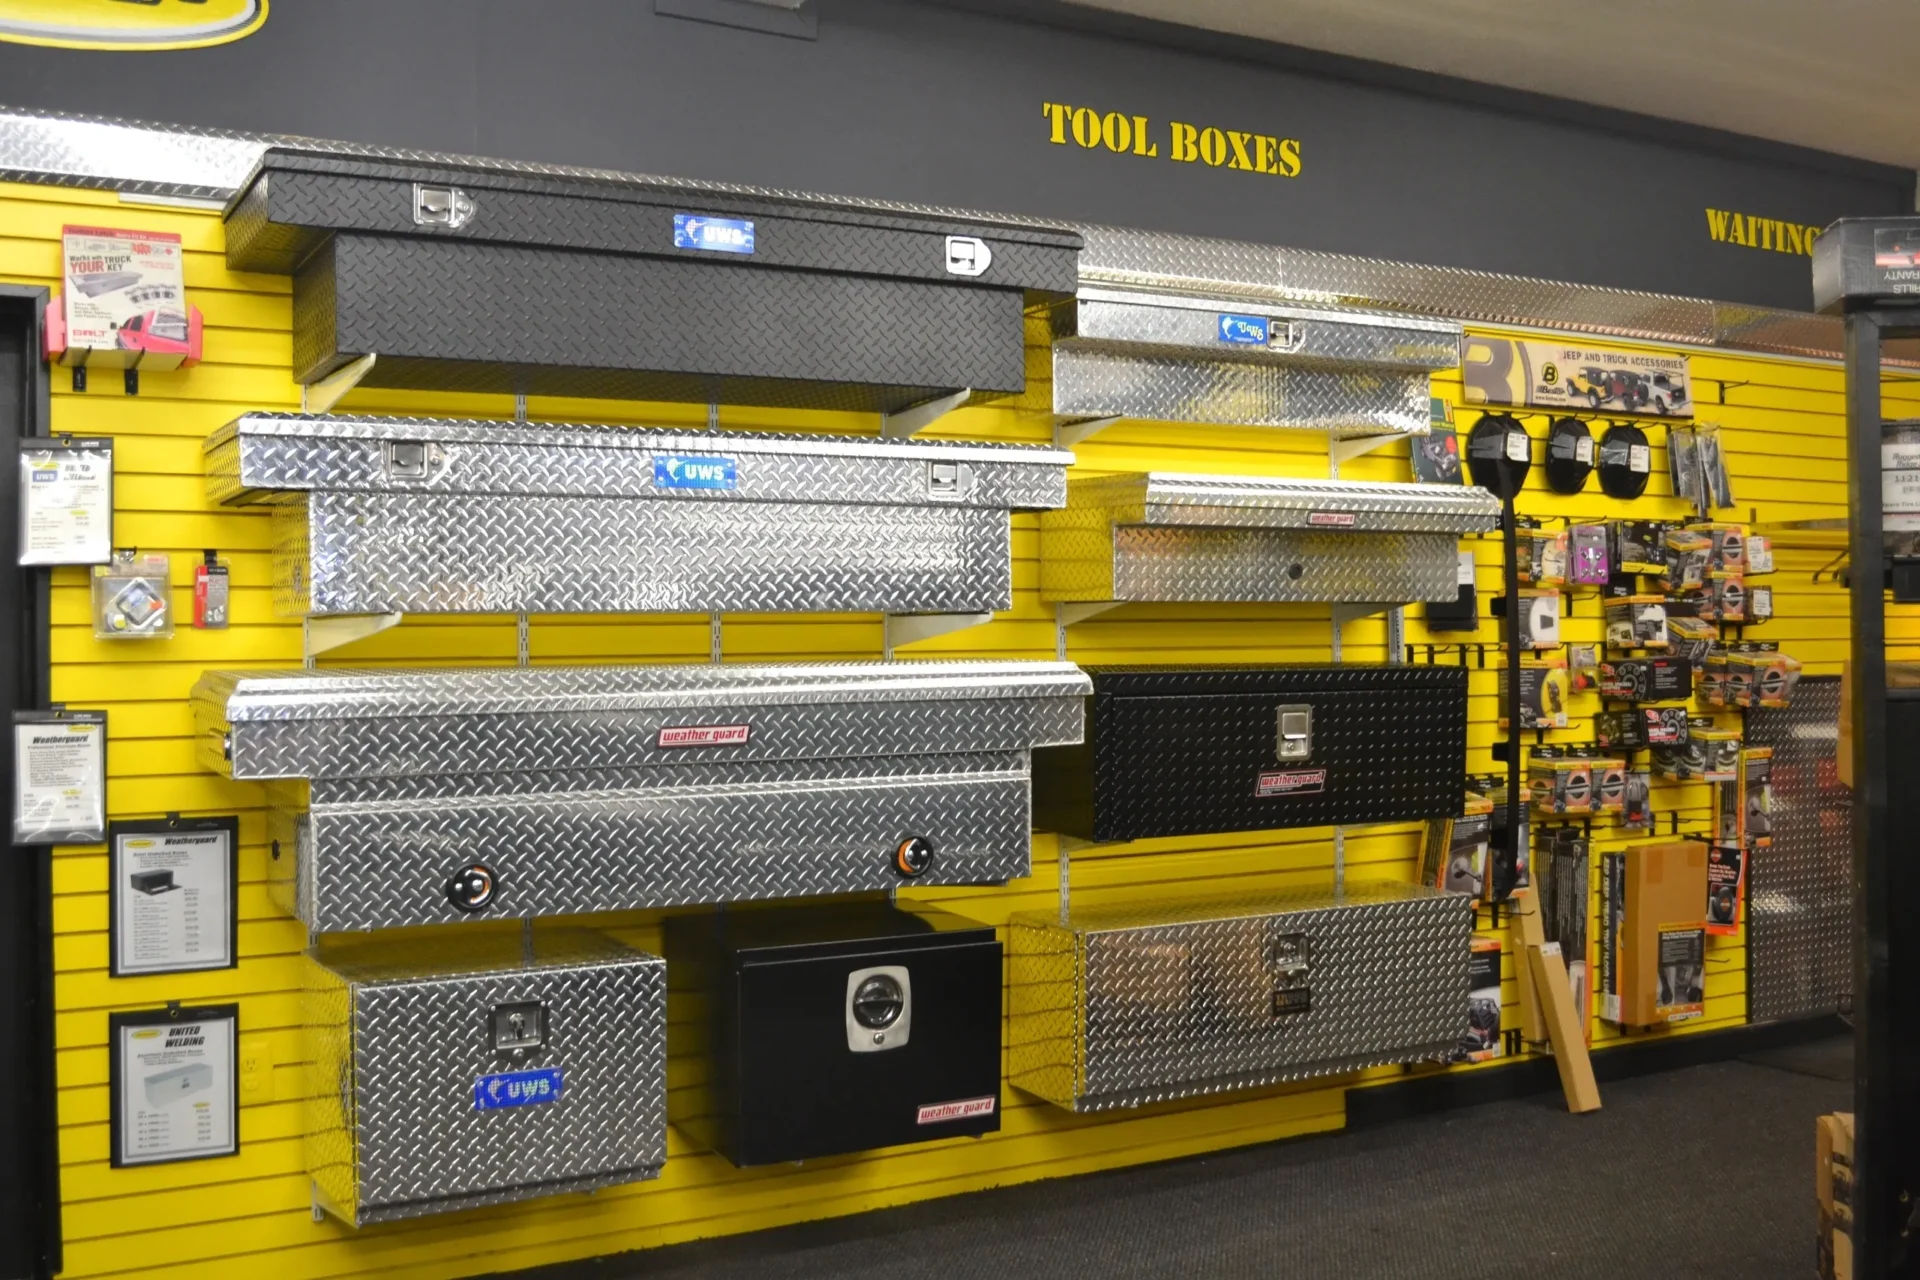 A display of various metal tool boxes for sale on the wall of a hardware store.